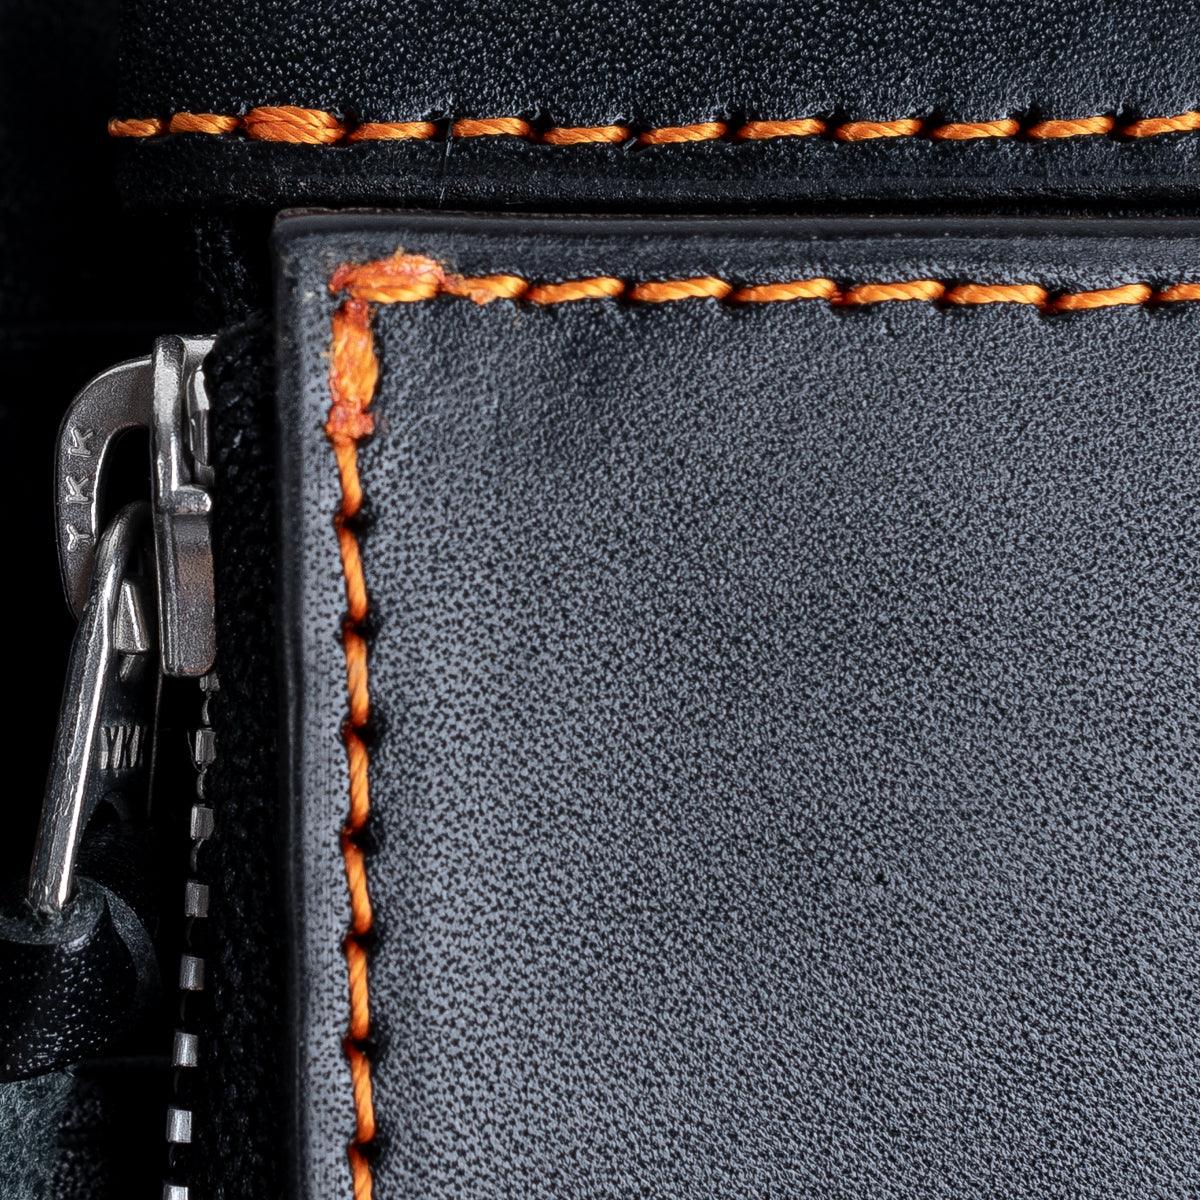 Image showing the IHG-02-NAV - Medium Shell Cordovan Wallet - Navy Blue which is a WALLETS AND CHAINS described by the following info Accessories, Iron Heart, Released, WALLETS AND CHAINS and sold on the IRON HEART GERMANY online store